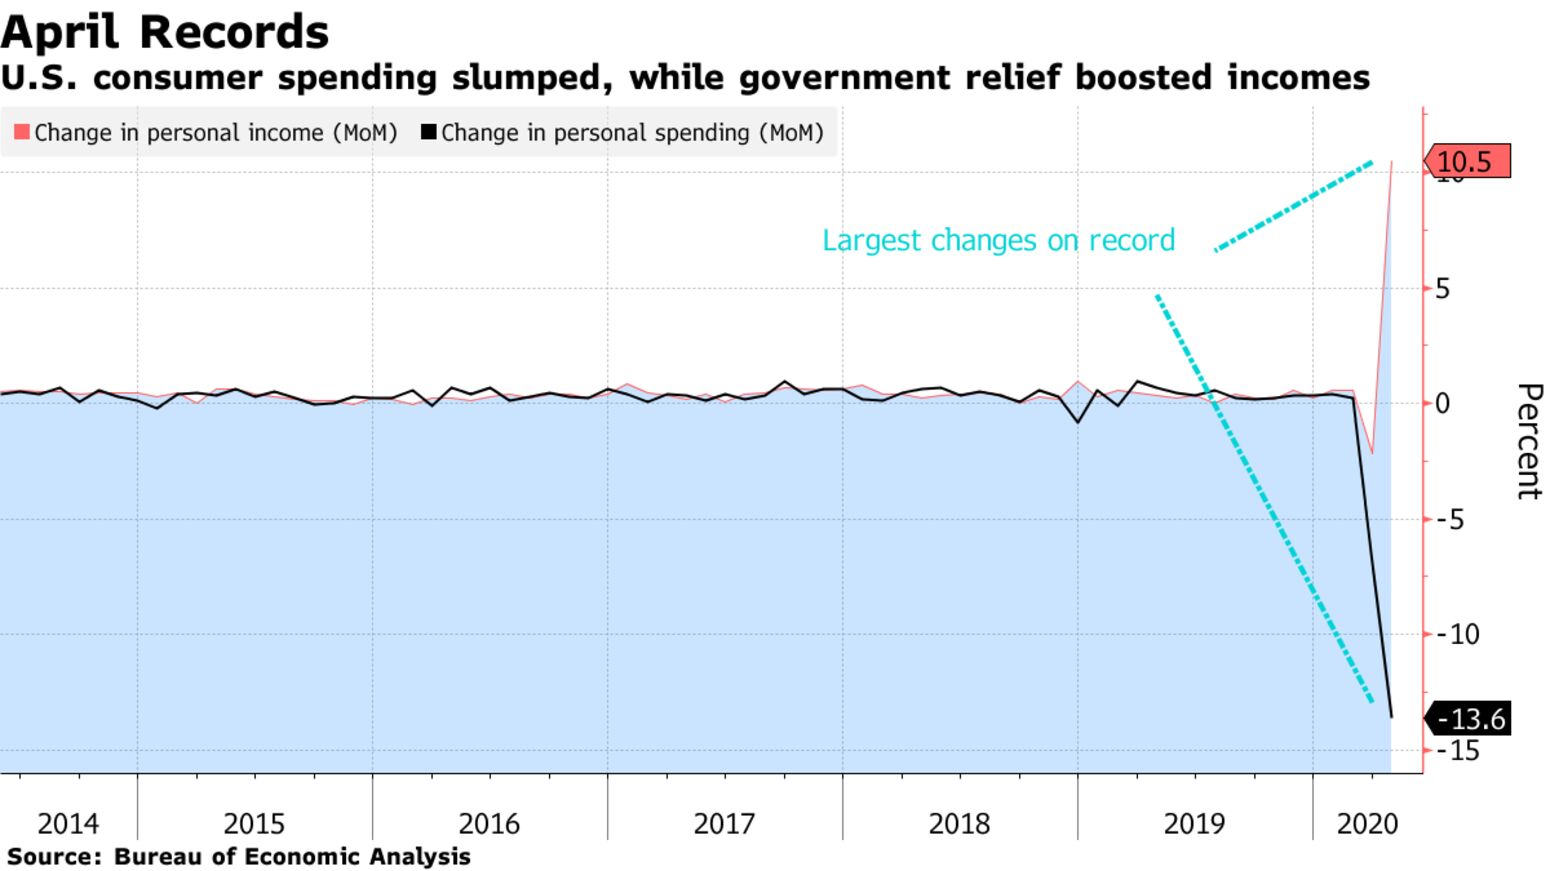 U.S. consumer spending slumped, while government relief boosted incomes